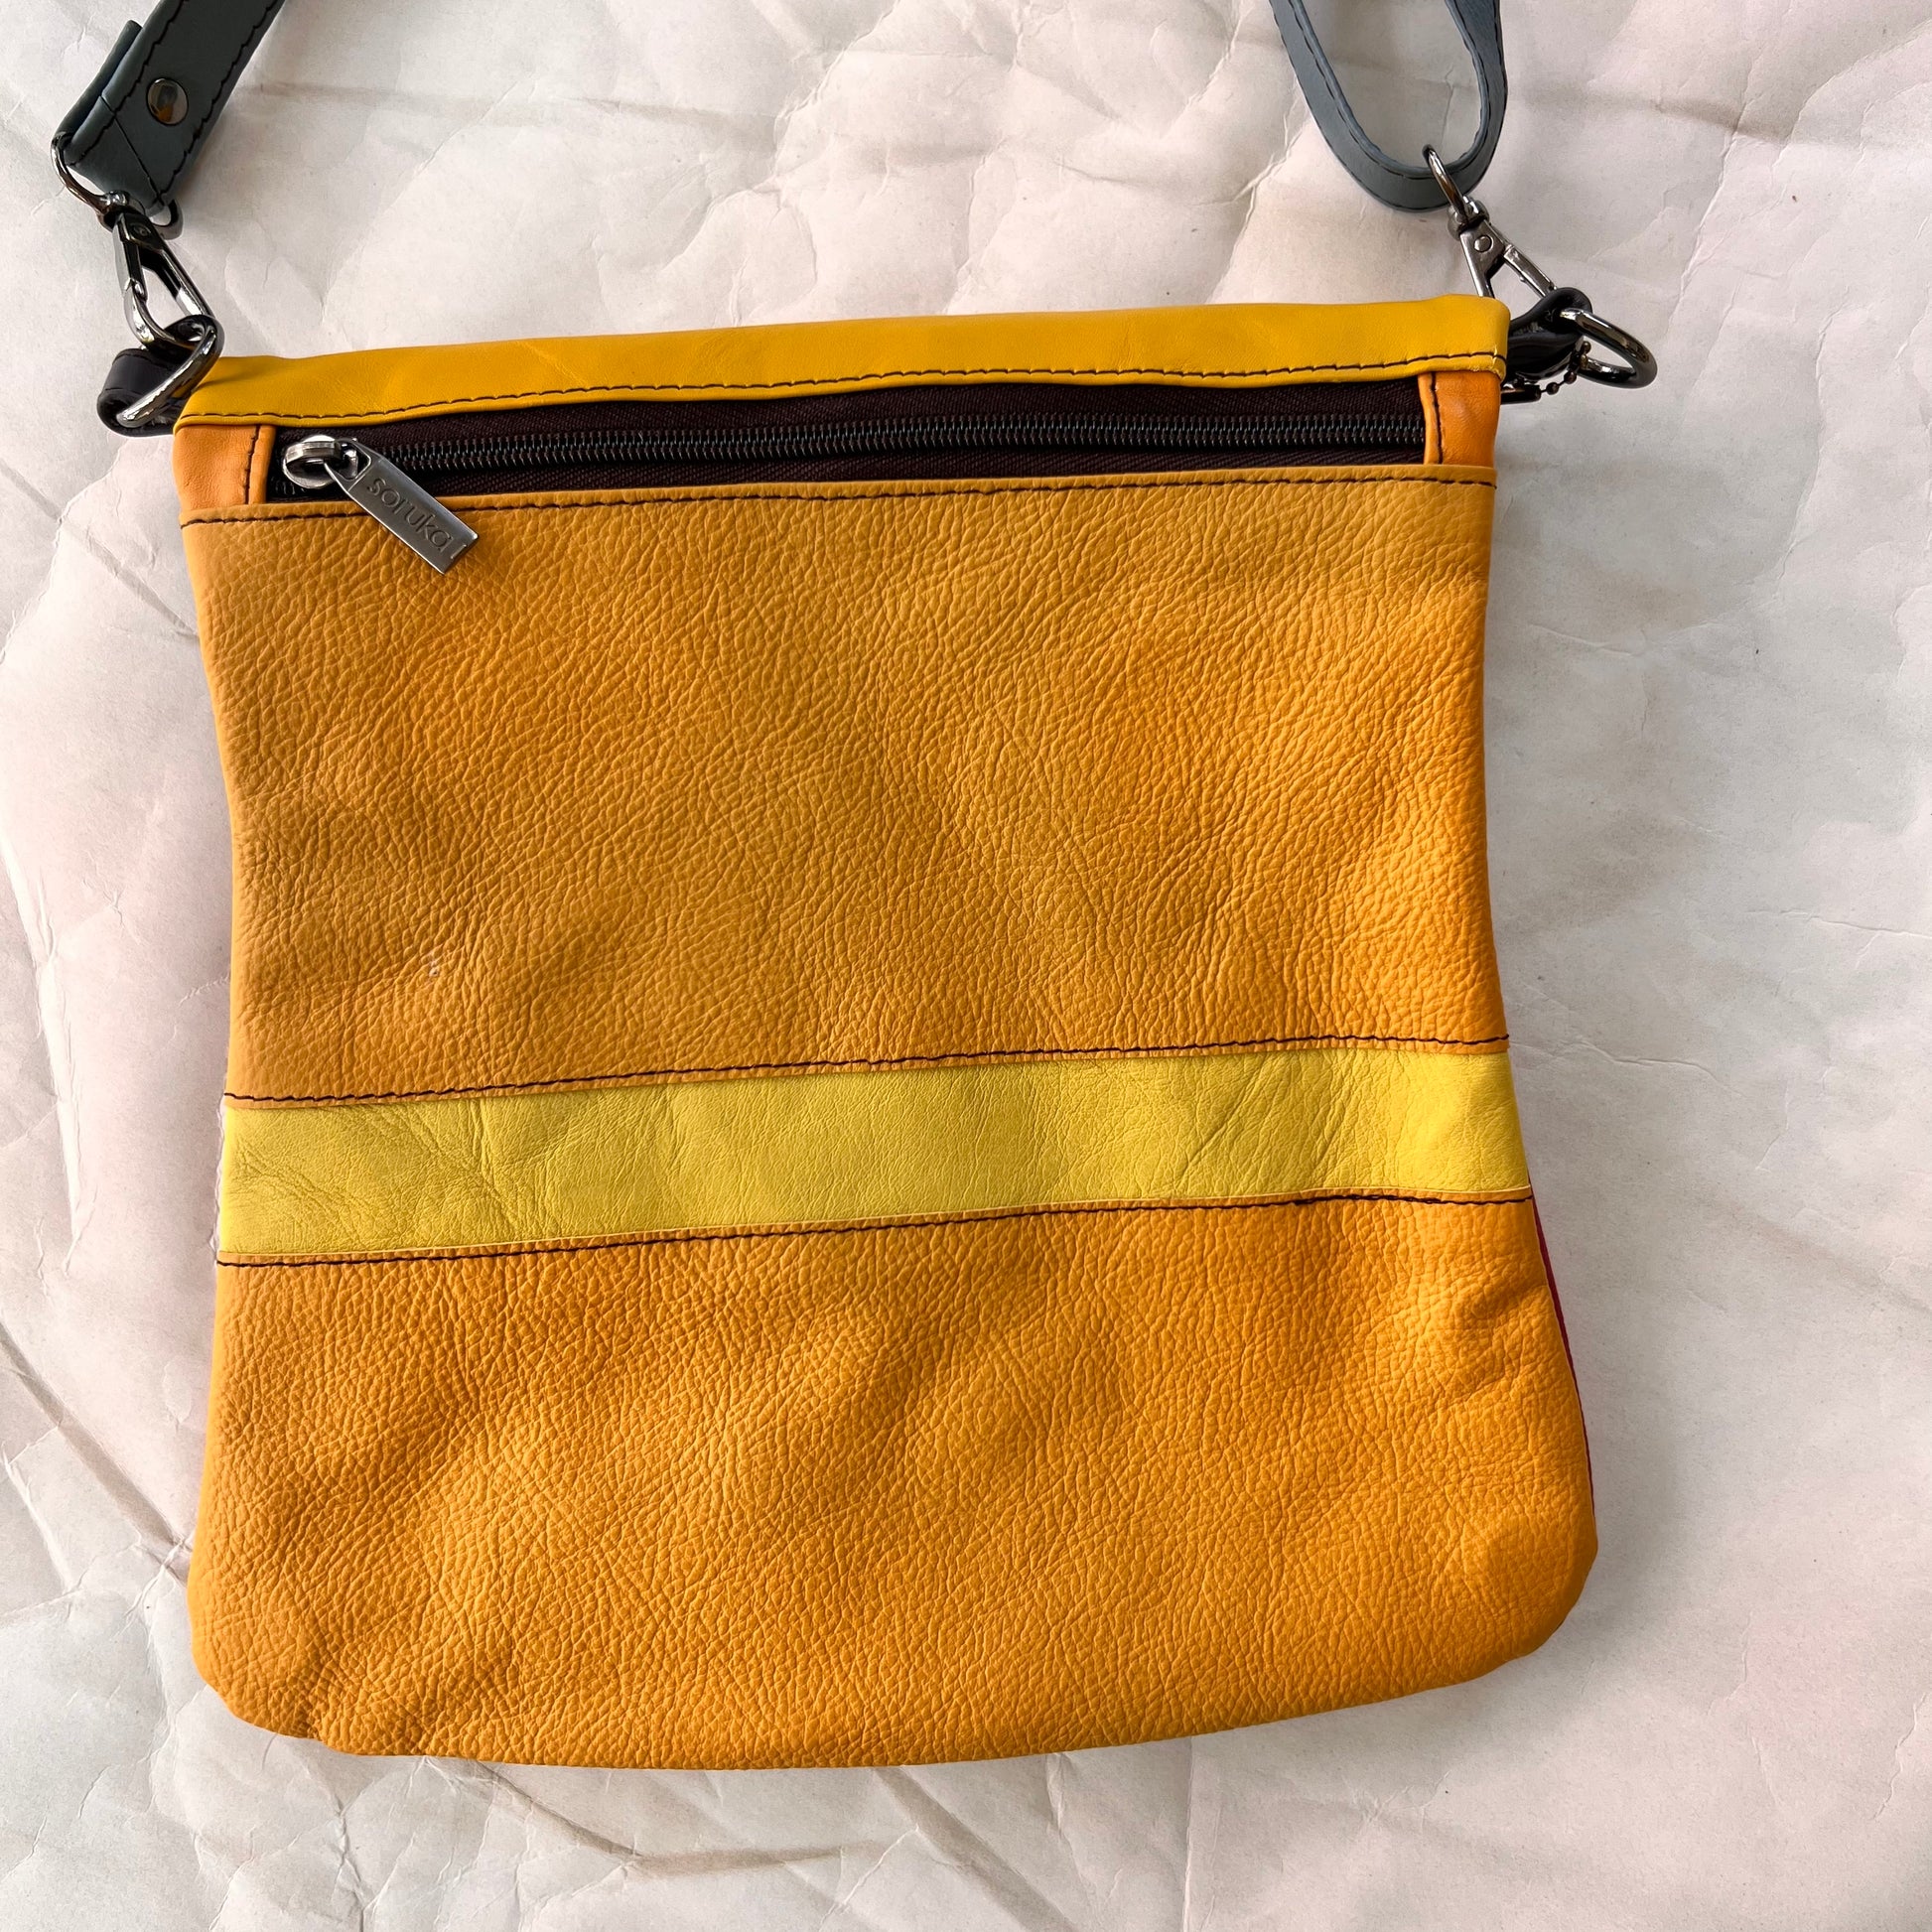 shades of yellow striped greta bag with zipper across the top.